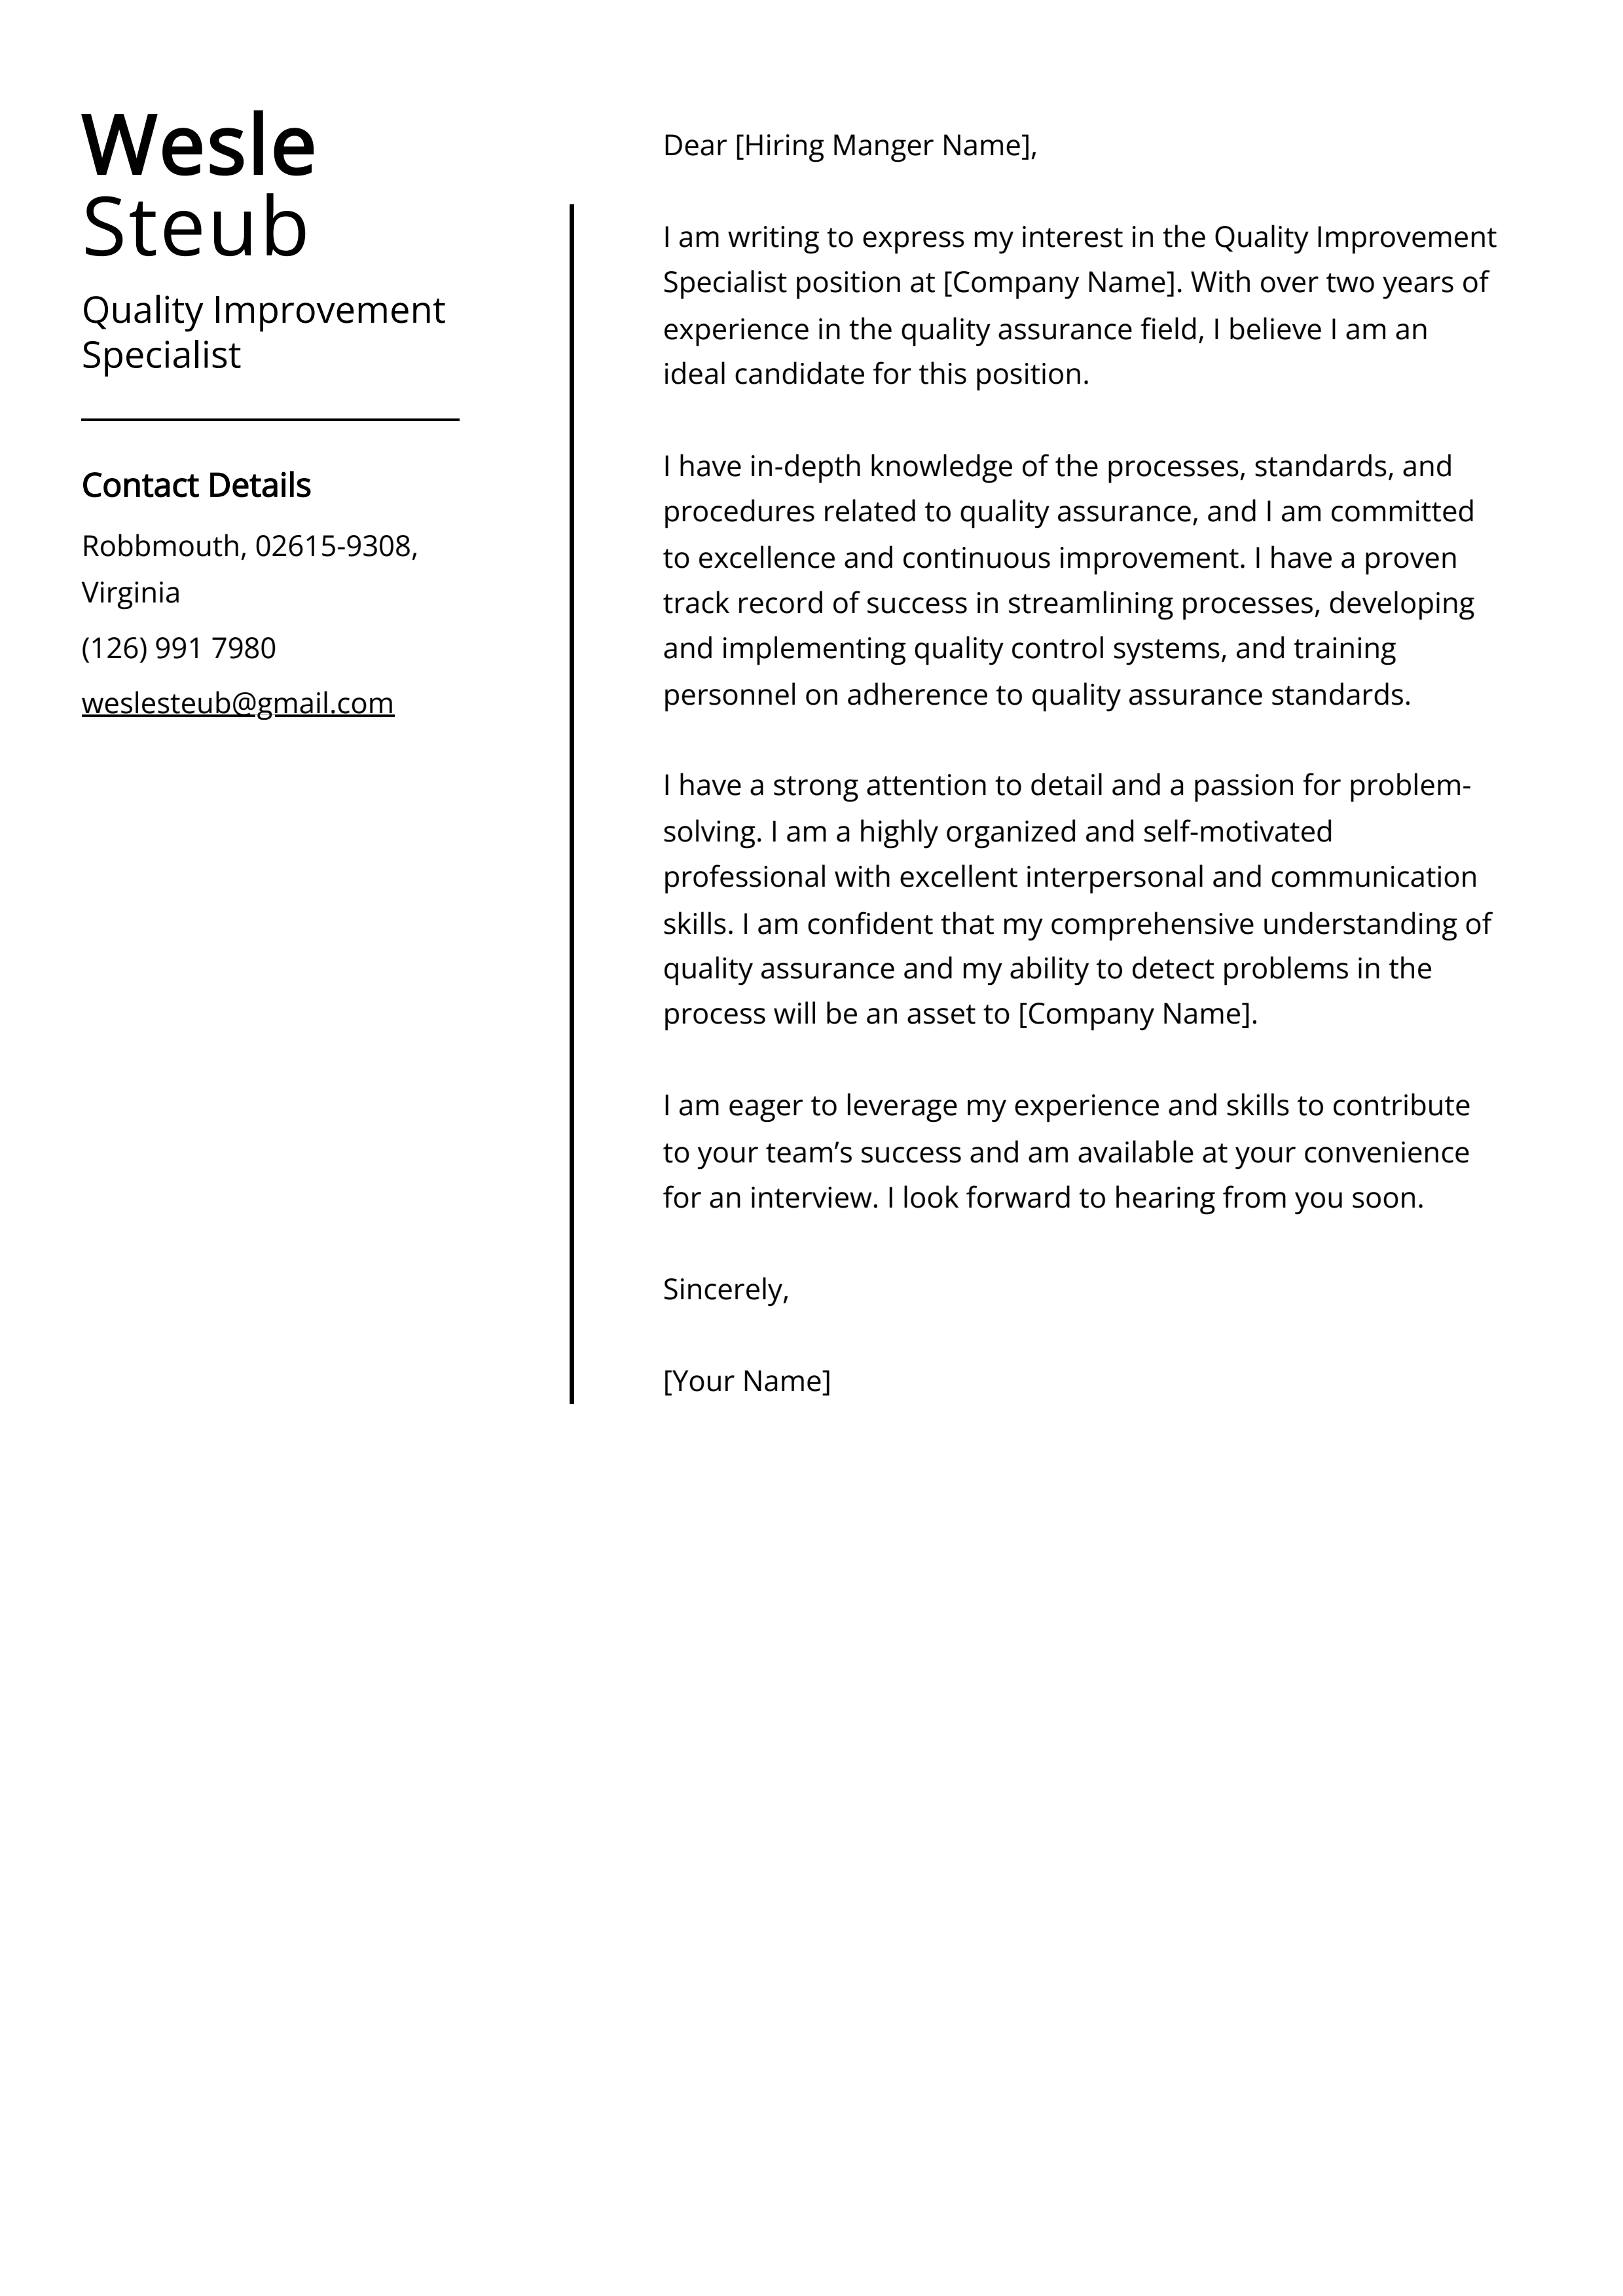 Quality Improvement Specialist Cover Letter Example